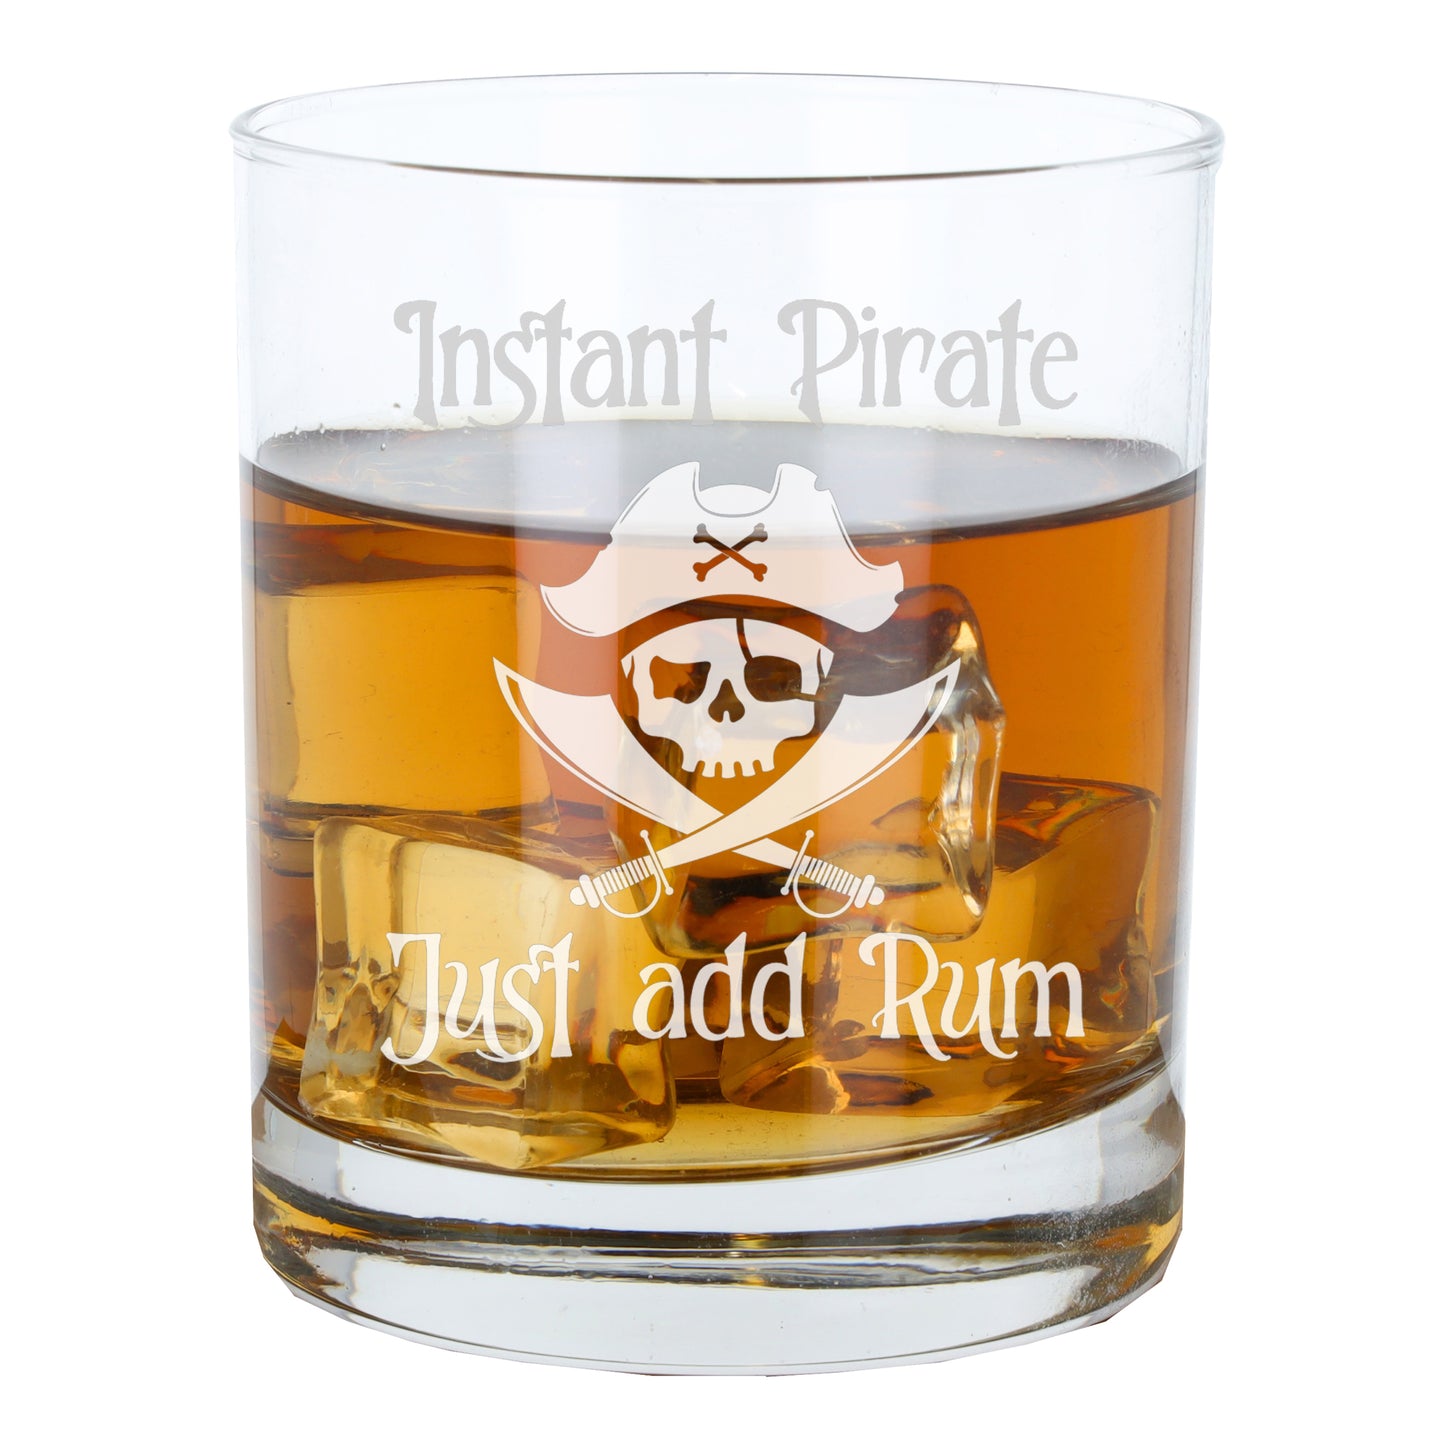 Personalised Engraved "Instant Pirate" Rum Glass and/or Coaster Set  - Always Looking Good - Glass Only  